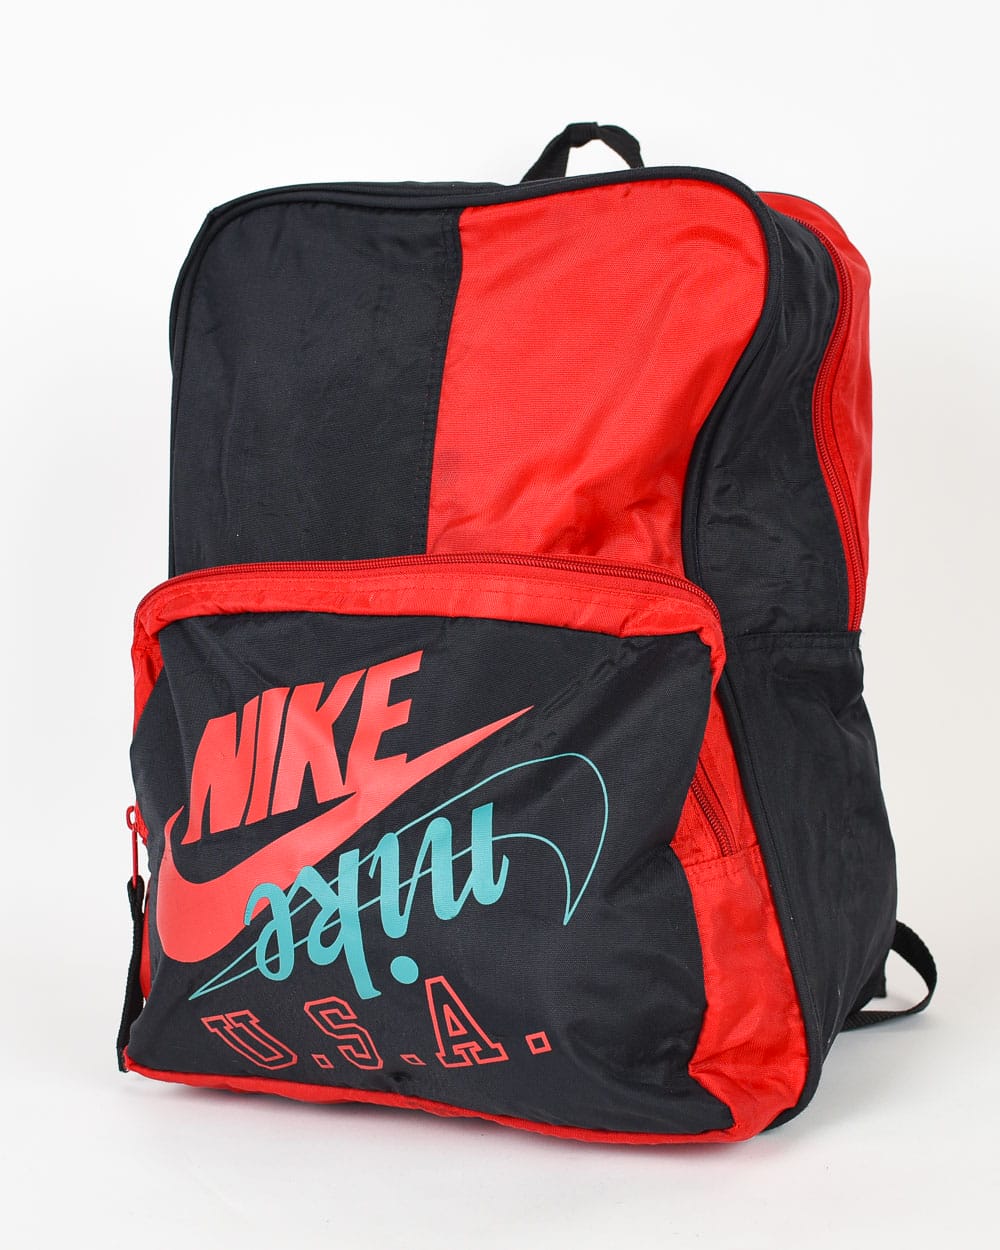 Brand New With Tags Unisex Nike All Access Sole Day Backpack Red | eBay